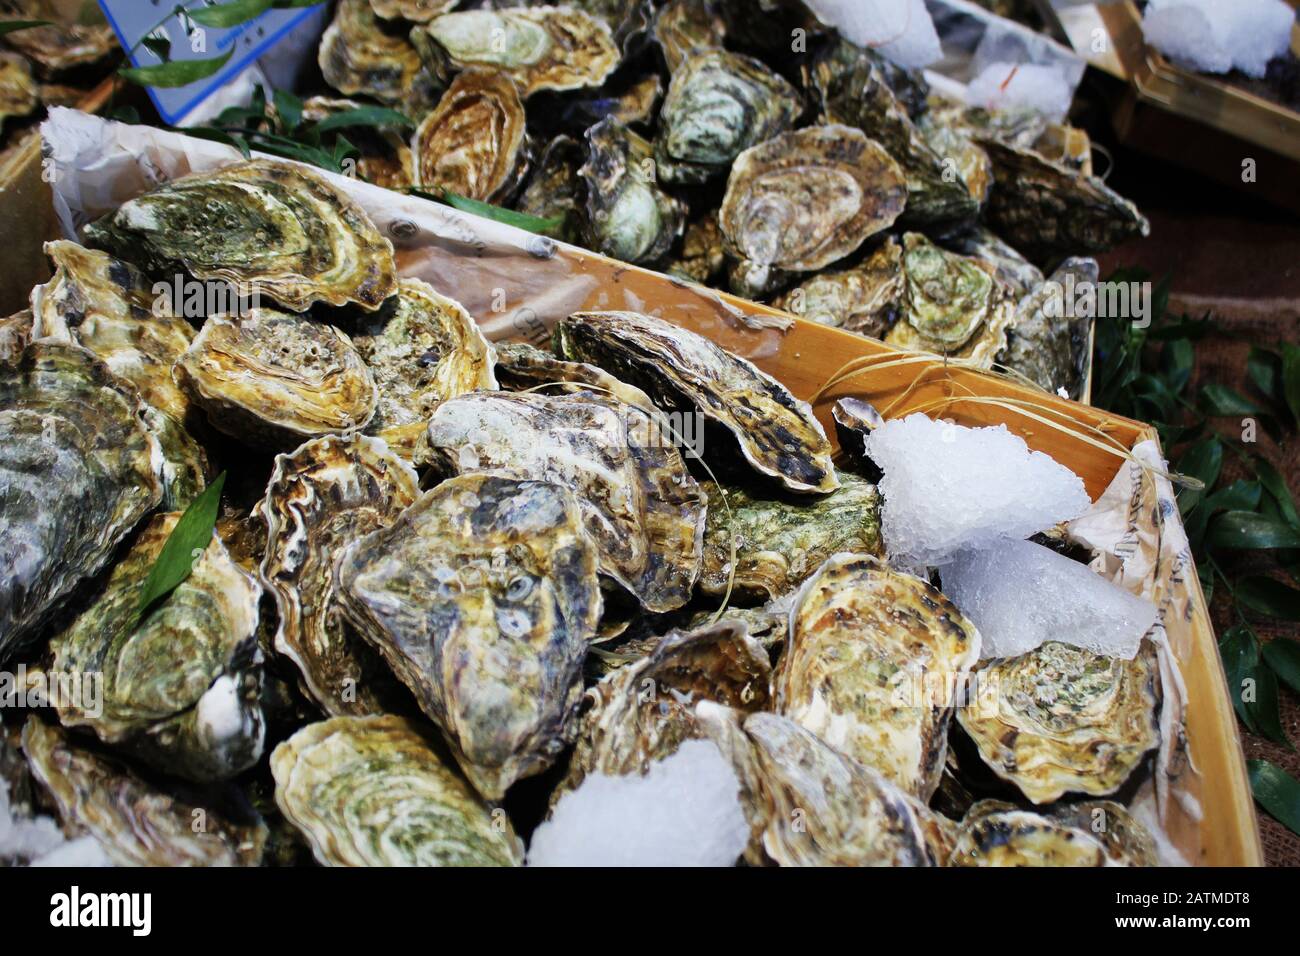 Fresh oysters on ice for sale at a seafood market. Stock Photo